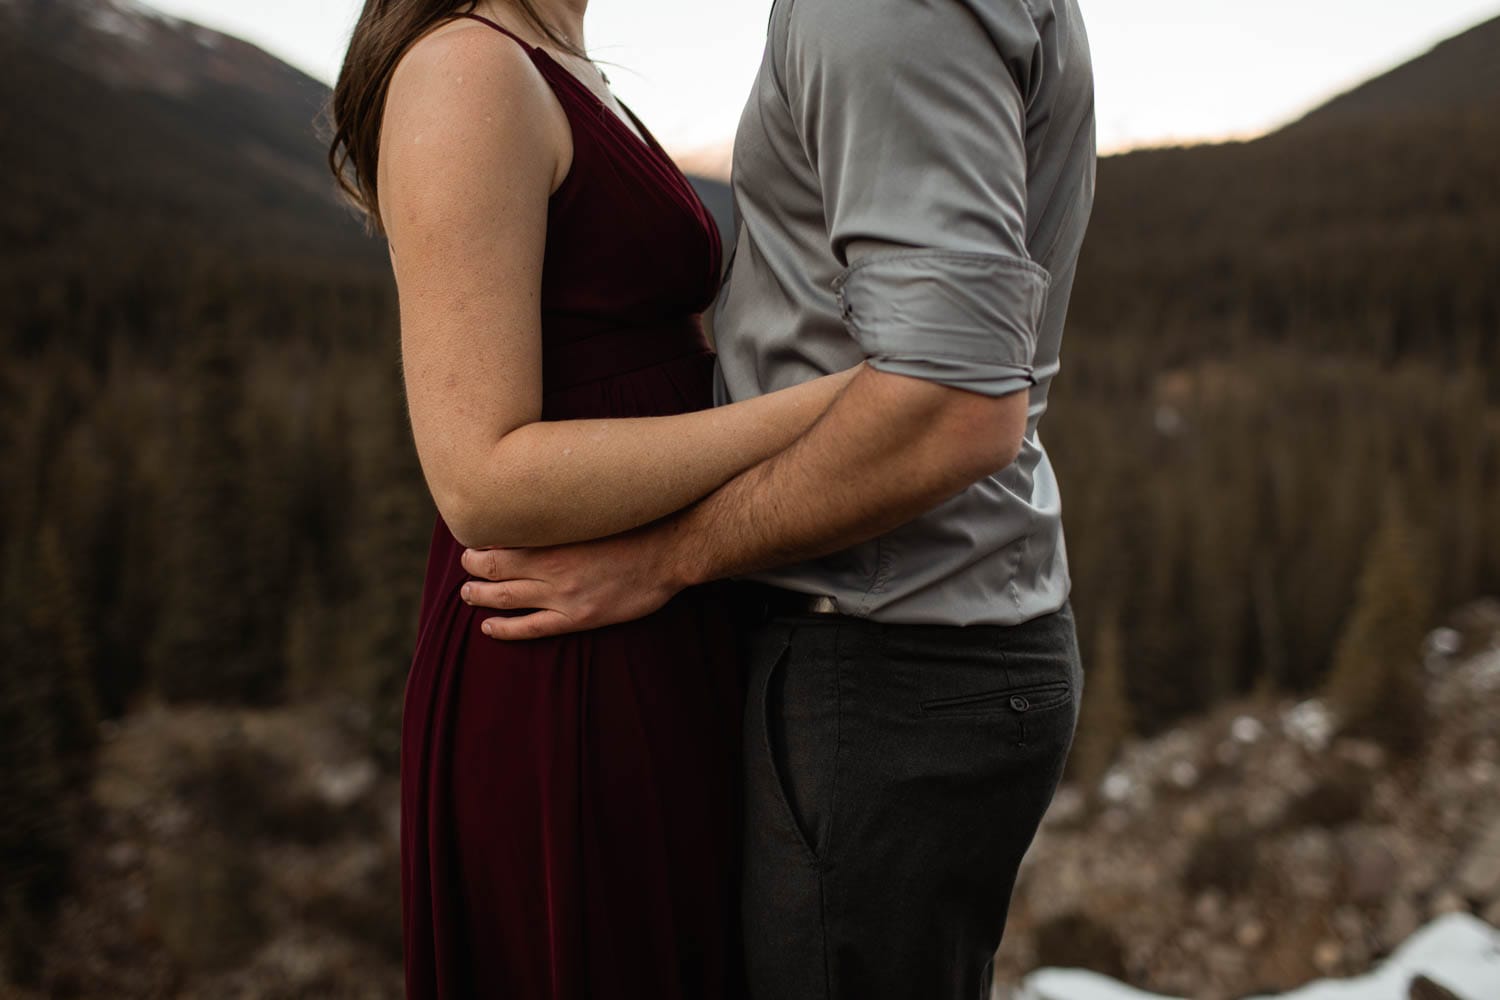 Couples Portrait in the mountains